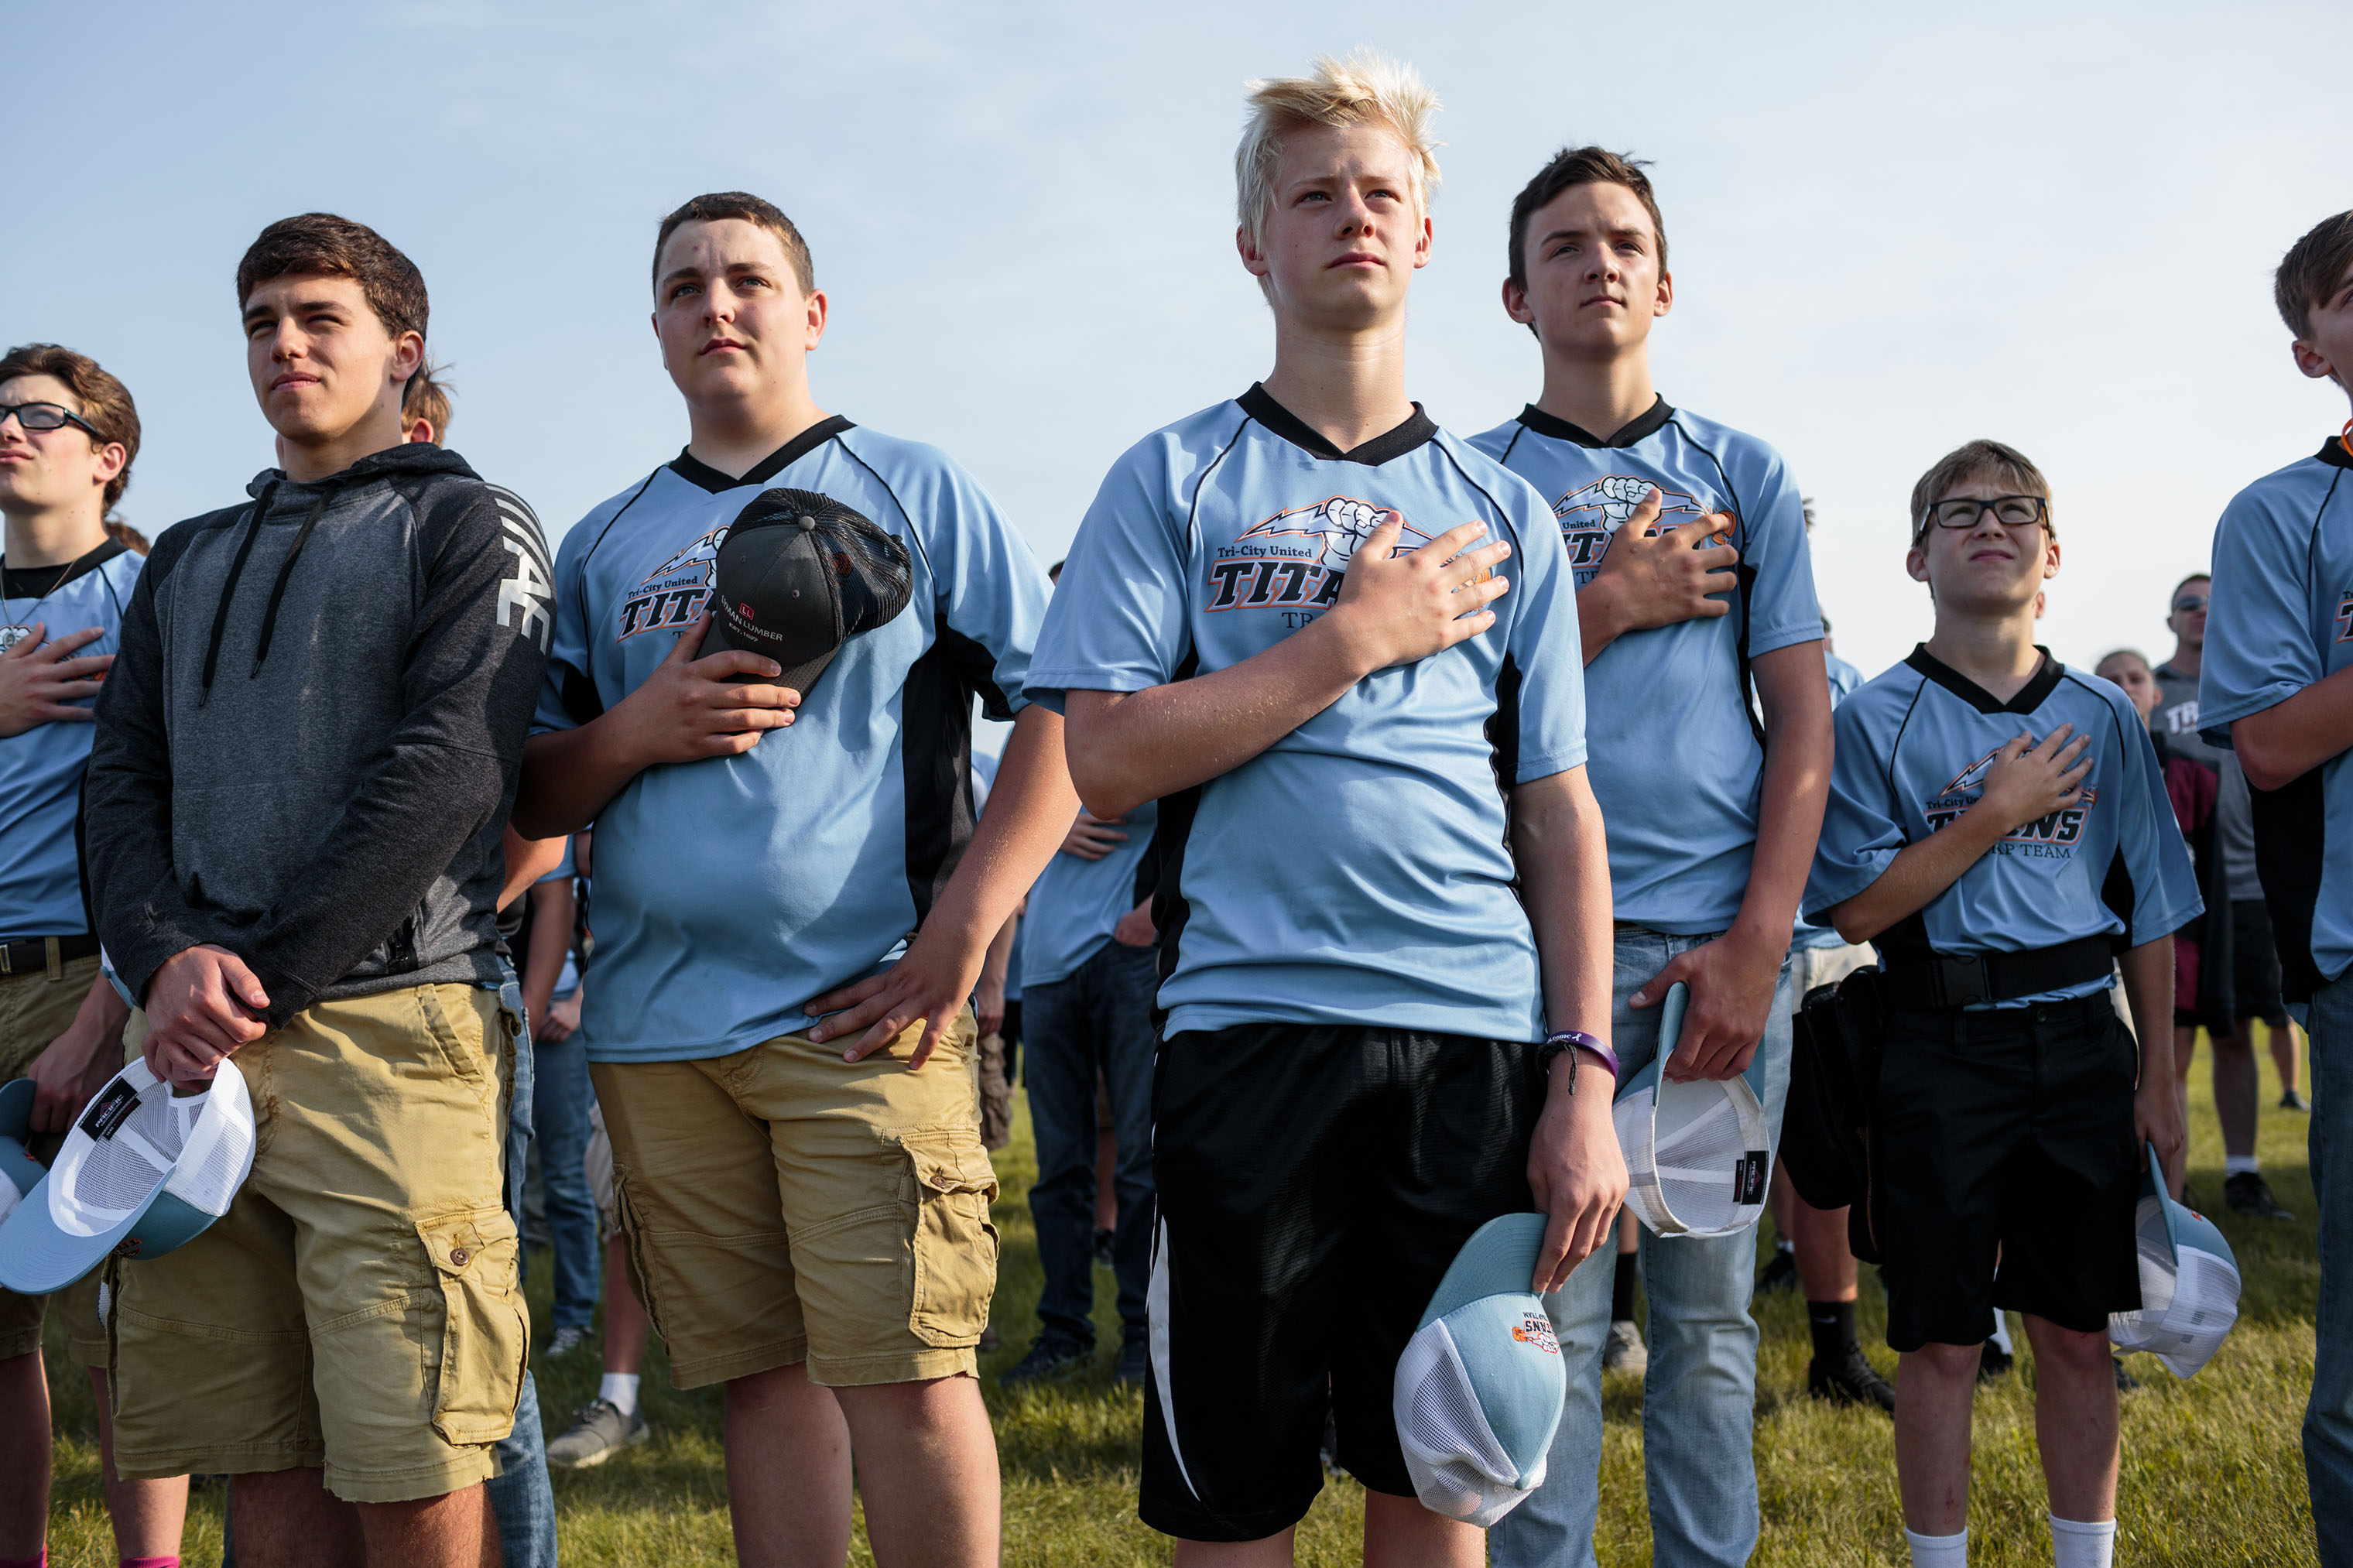 Students from Tri-City United High School stand for the Pledge of Allegiance early in the morning on June 15, 2018, before beginning to compete in the annual trap shooting championship in Alexandria, Minnesota. (Sarah Blesener for TIME)